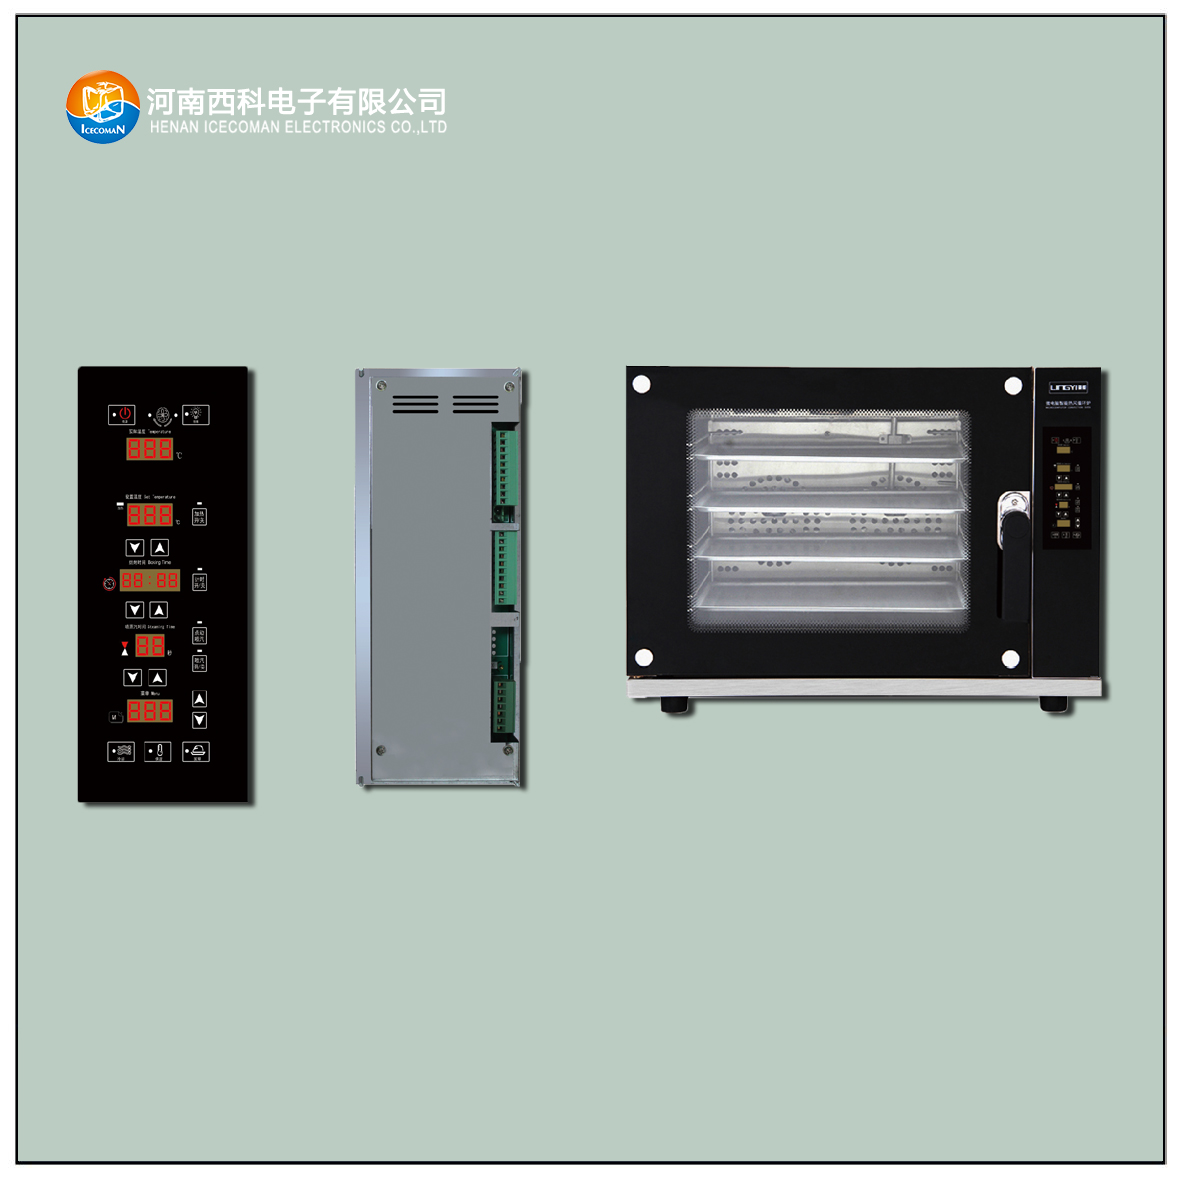 Hpkx-smg-c baking oven controller